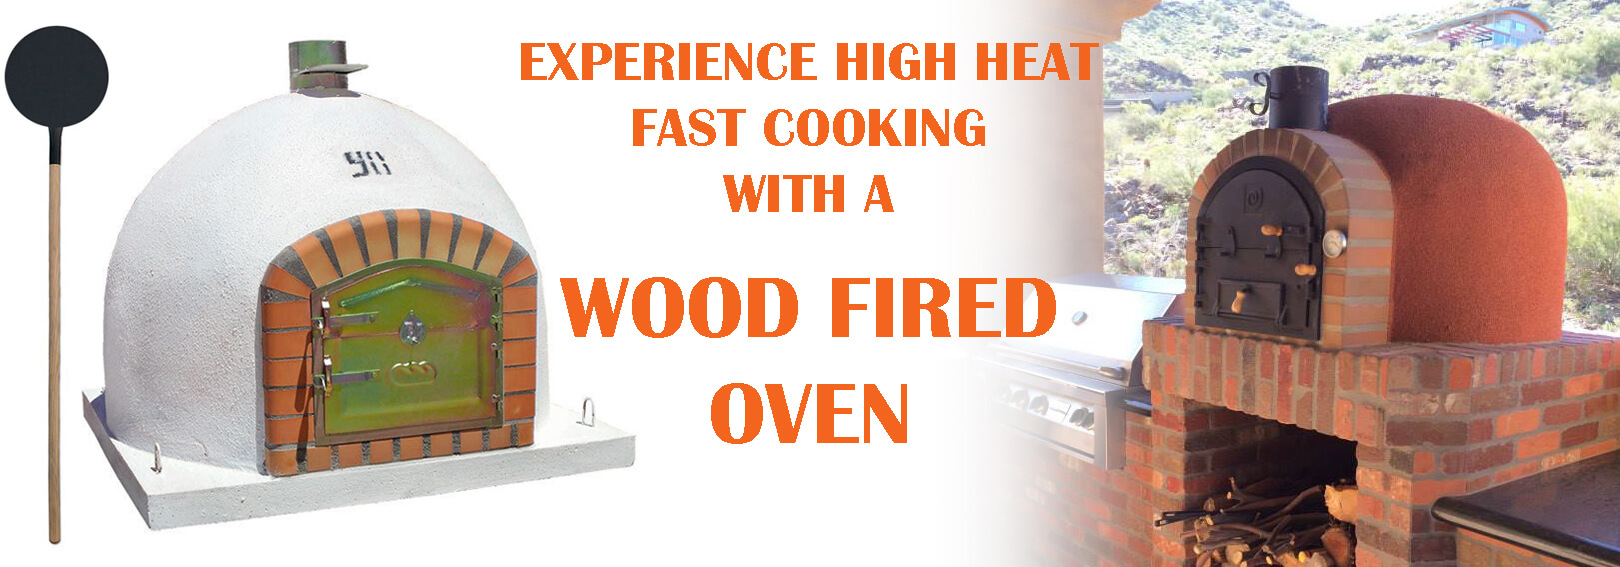 Our Wood Fired Ovens are Hand Crafted and will withstand incredibly high temperatures ideal for outdoor cooking in your garden.